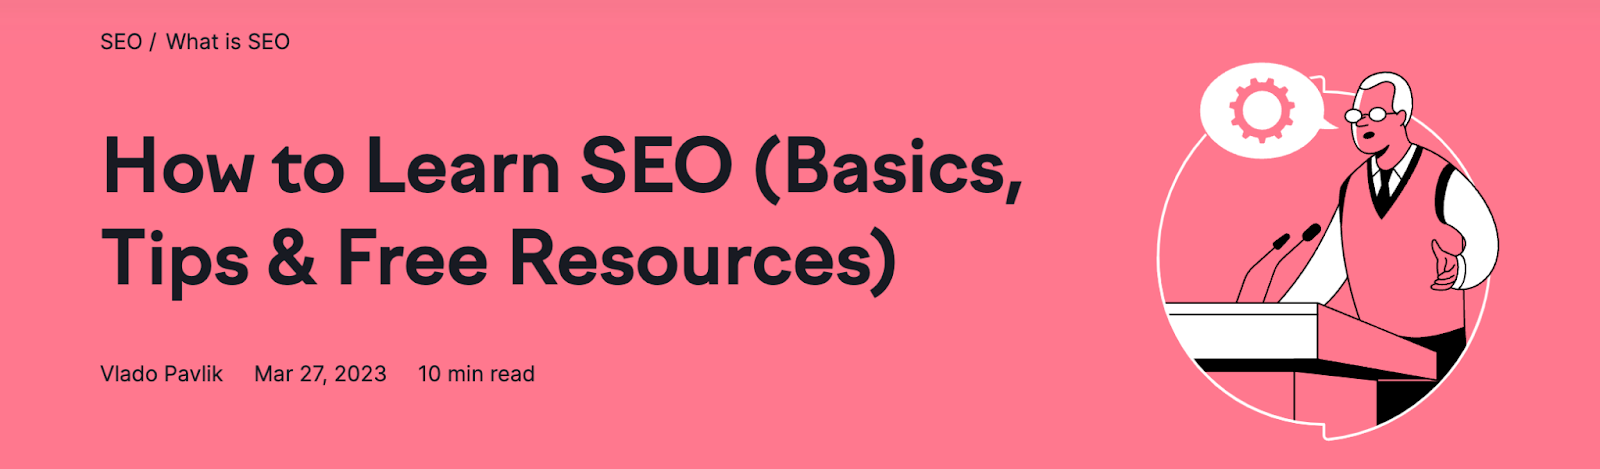 Example of a comprehensive title from Semrush blog "How to Learn SEO (Basics, Tips & Free Resources)"